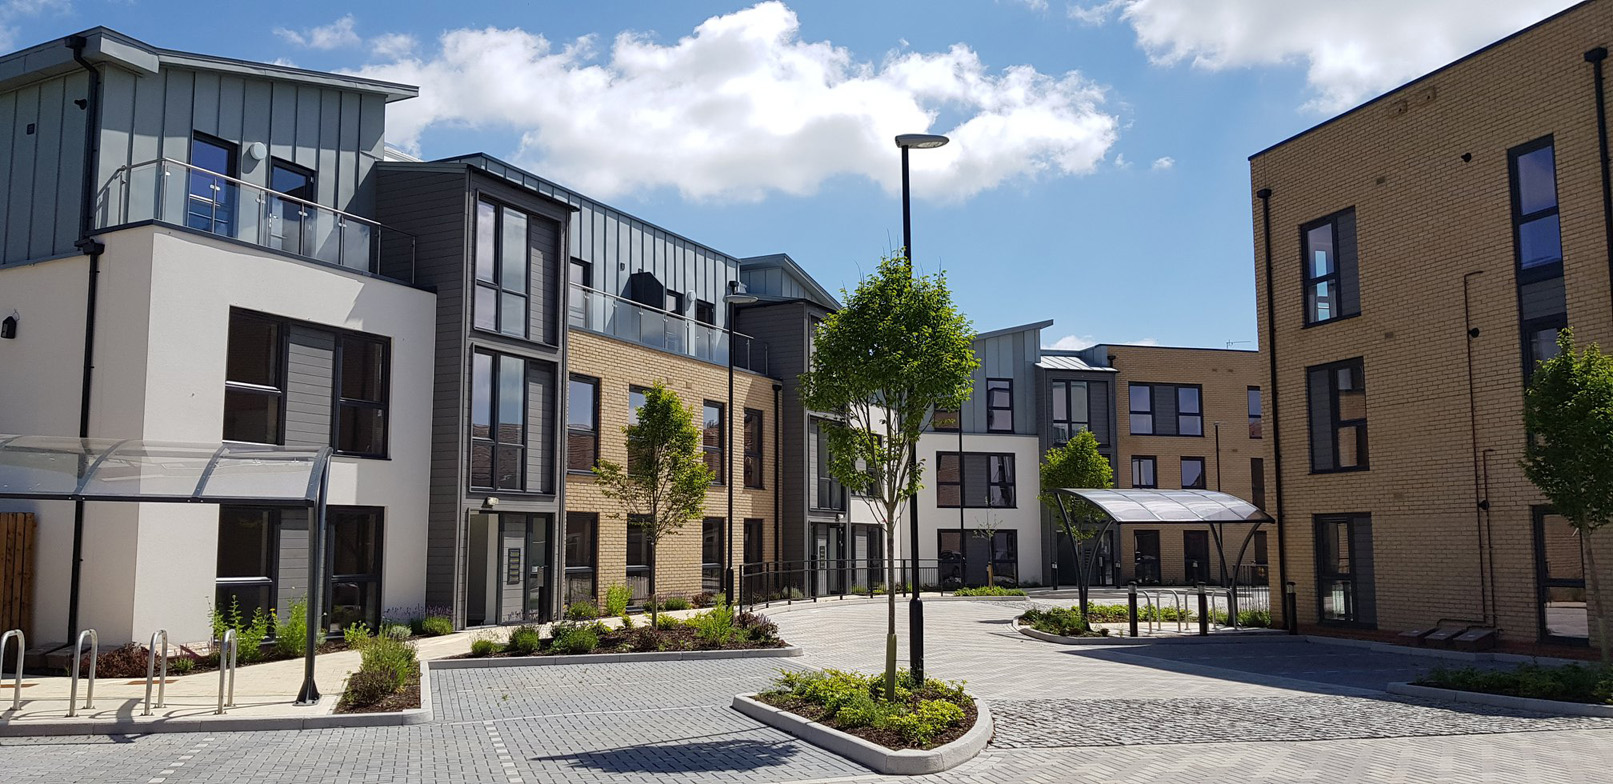 Affordable new apartments released in Bicester through Build! scheme